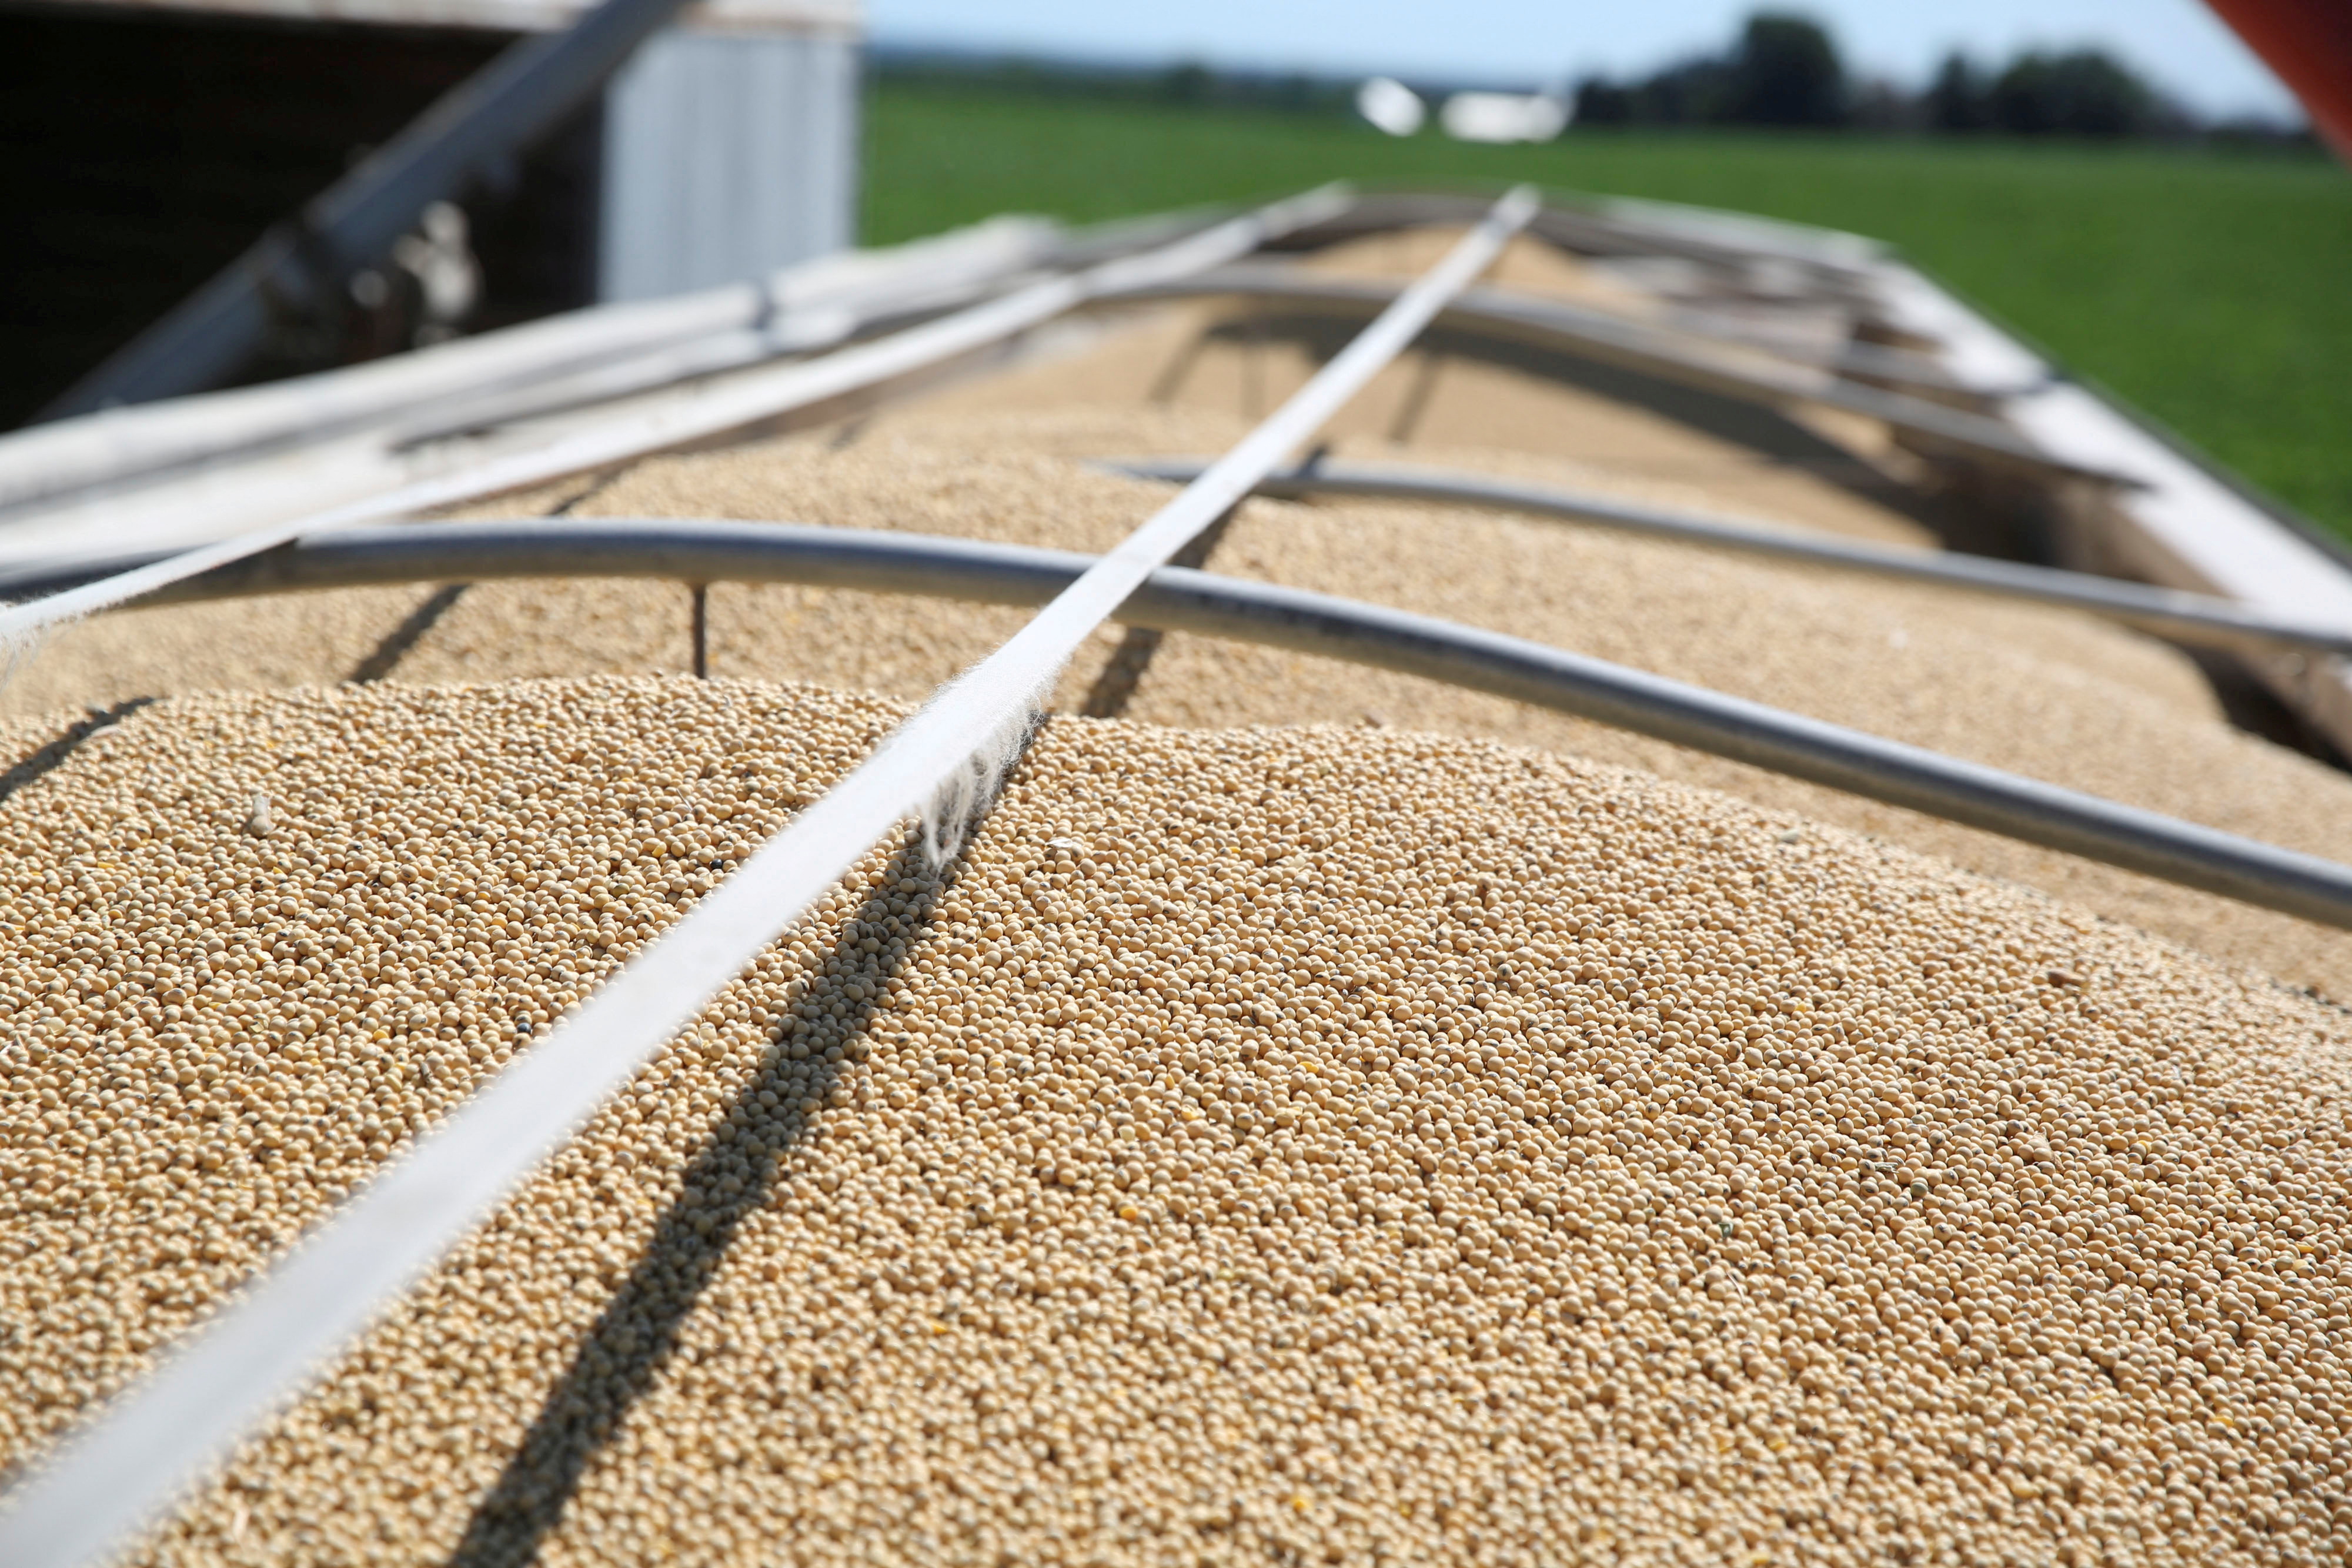 Soybeans fill a trailer at a farm in Buda, Illinois